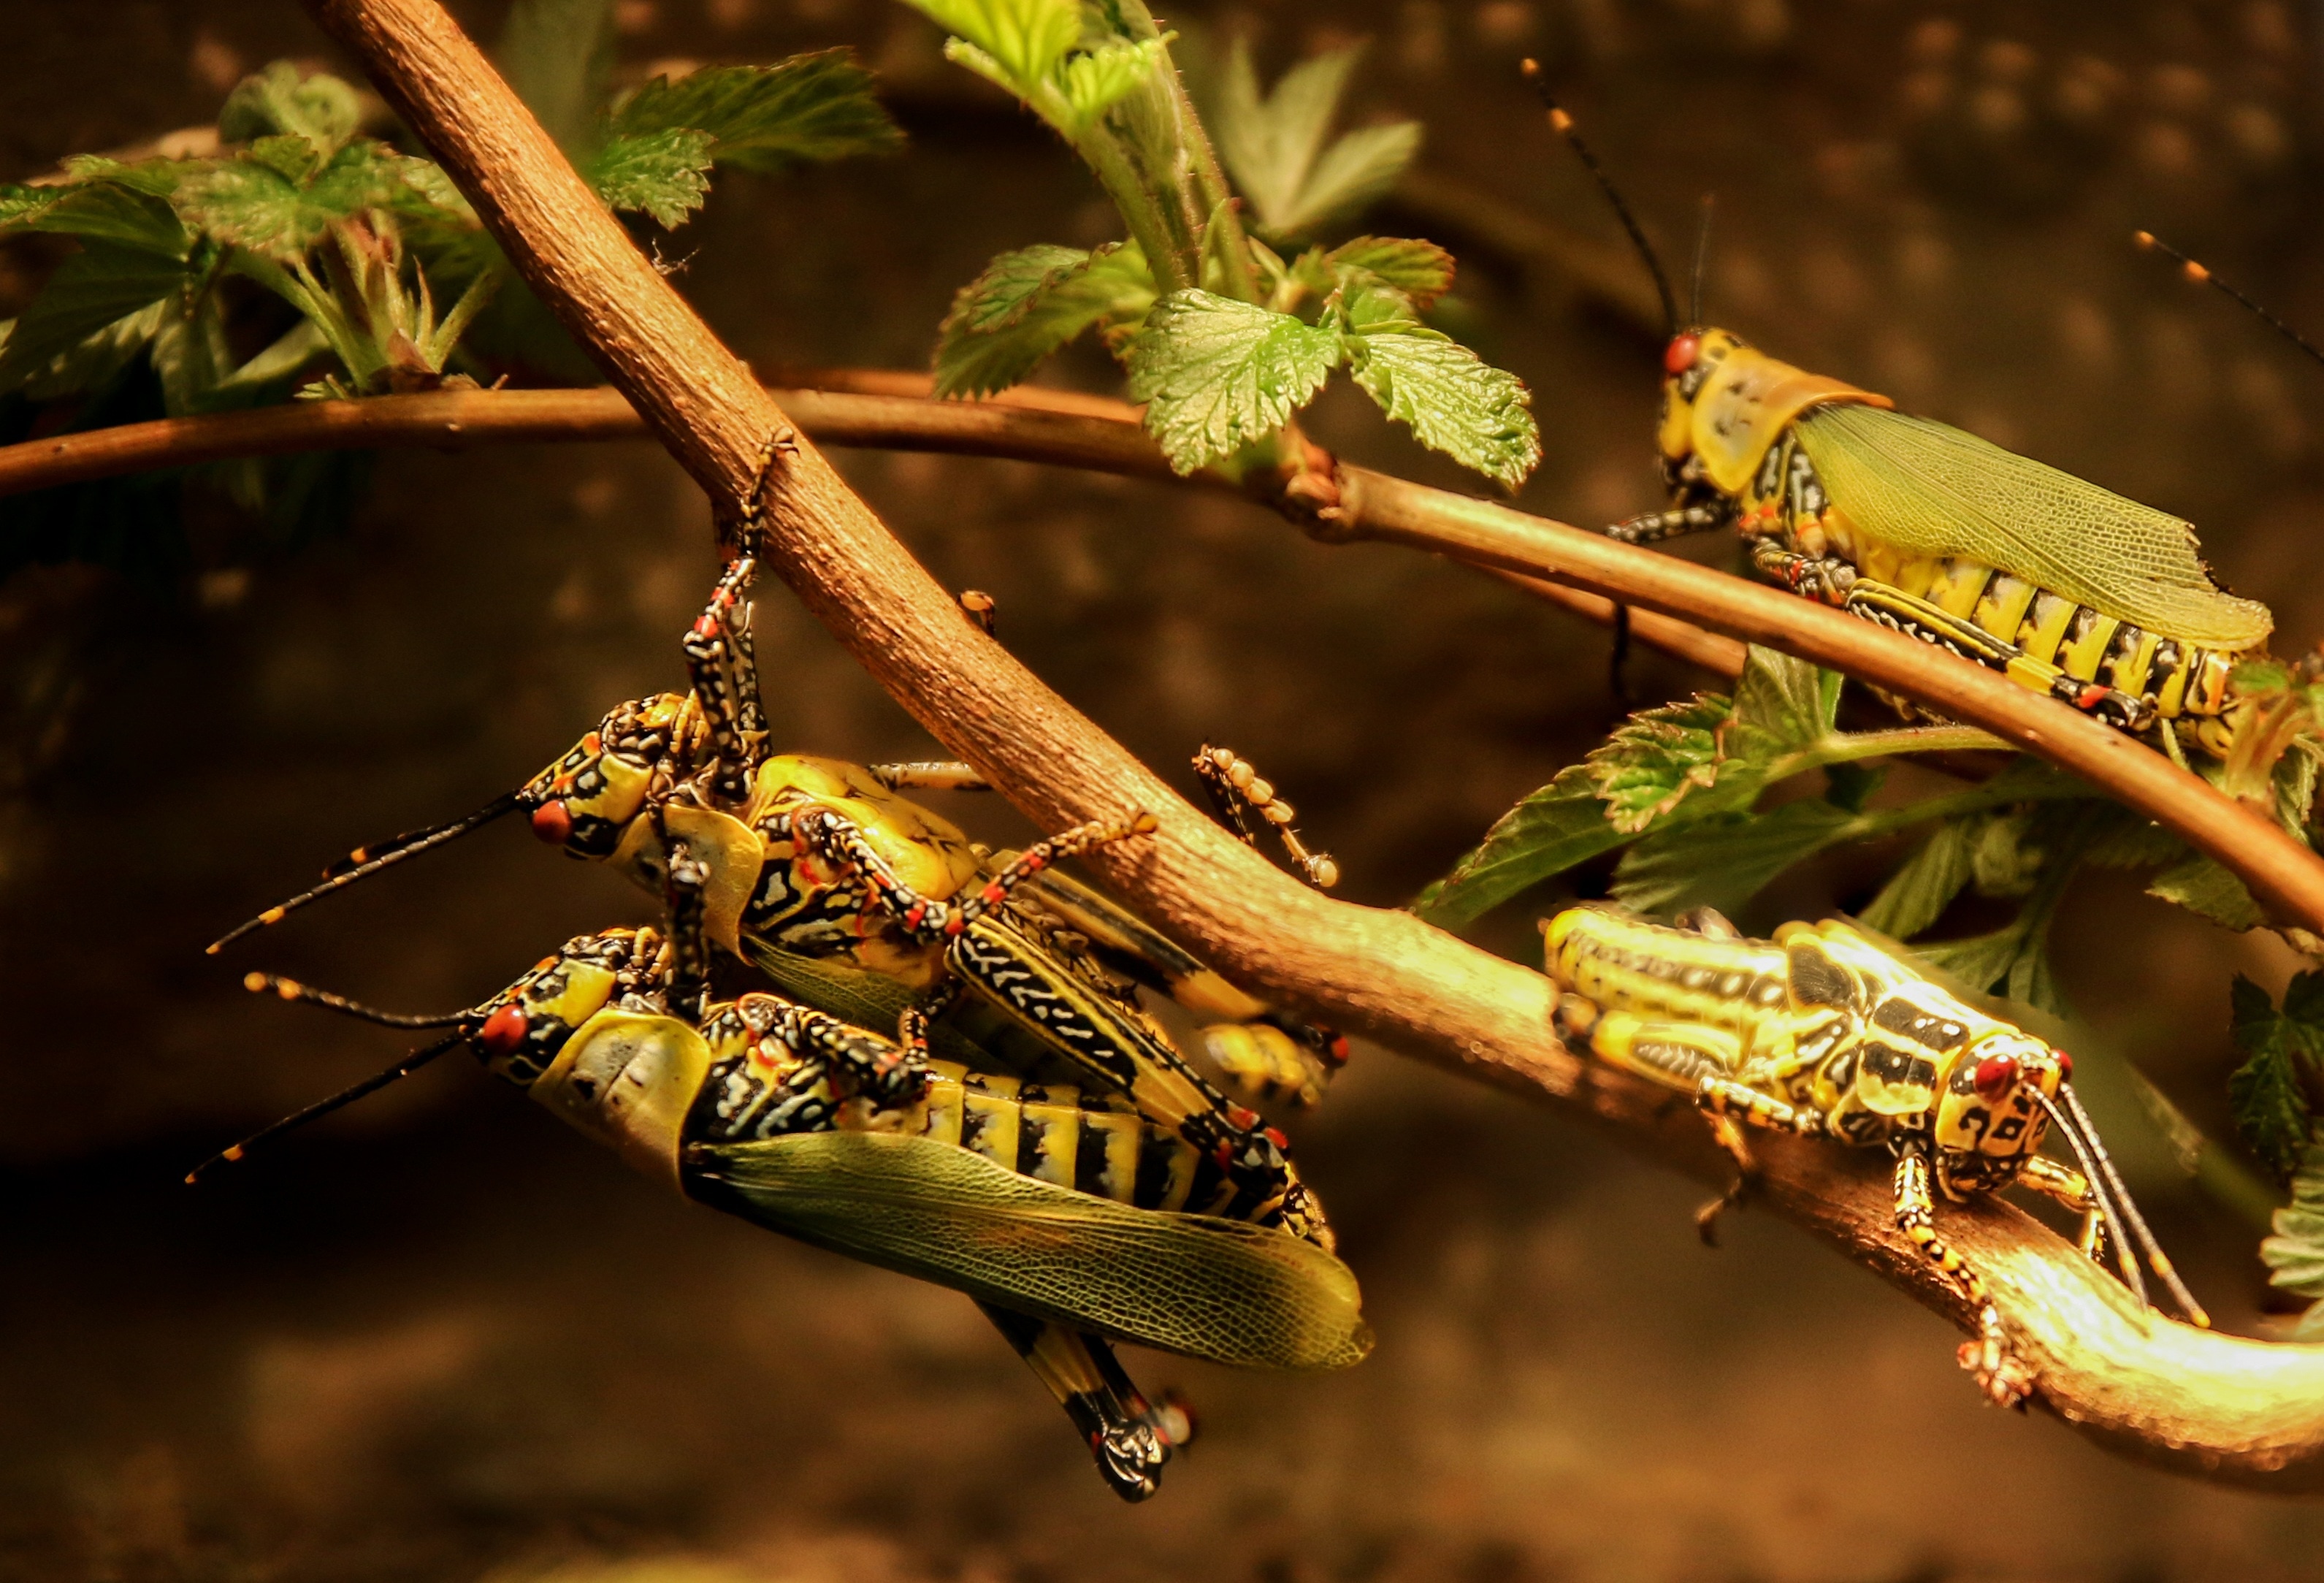 4 eastern lubber grasshoppers